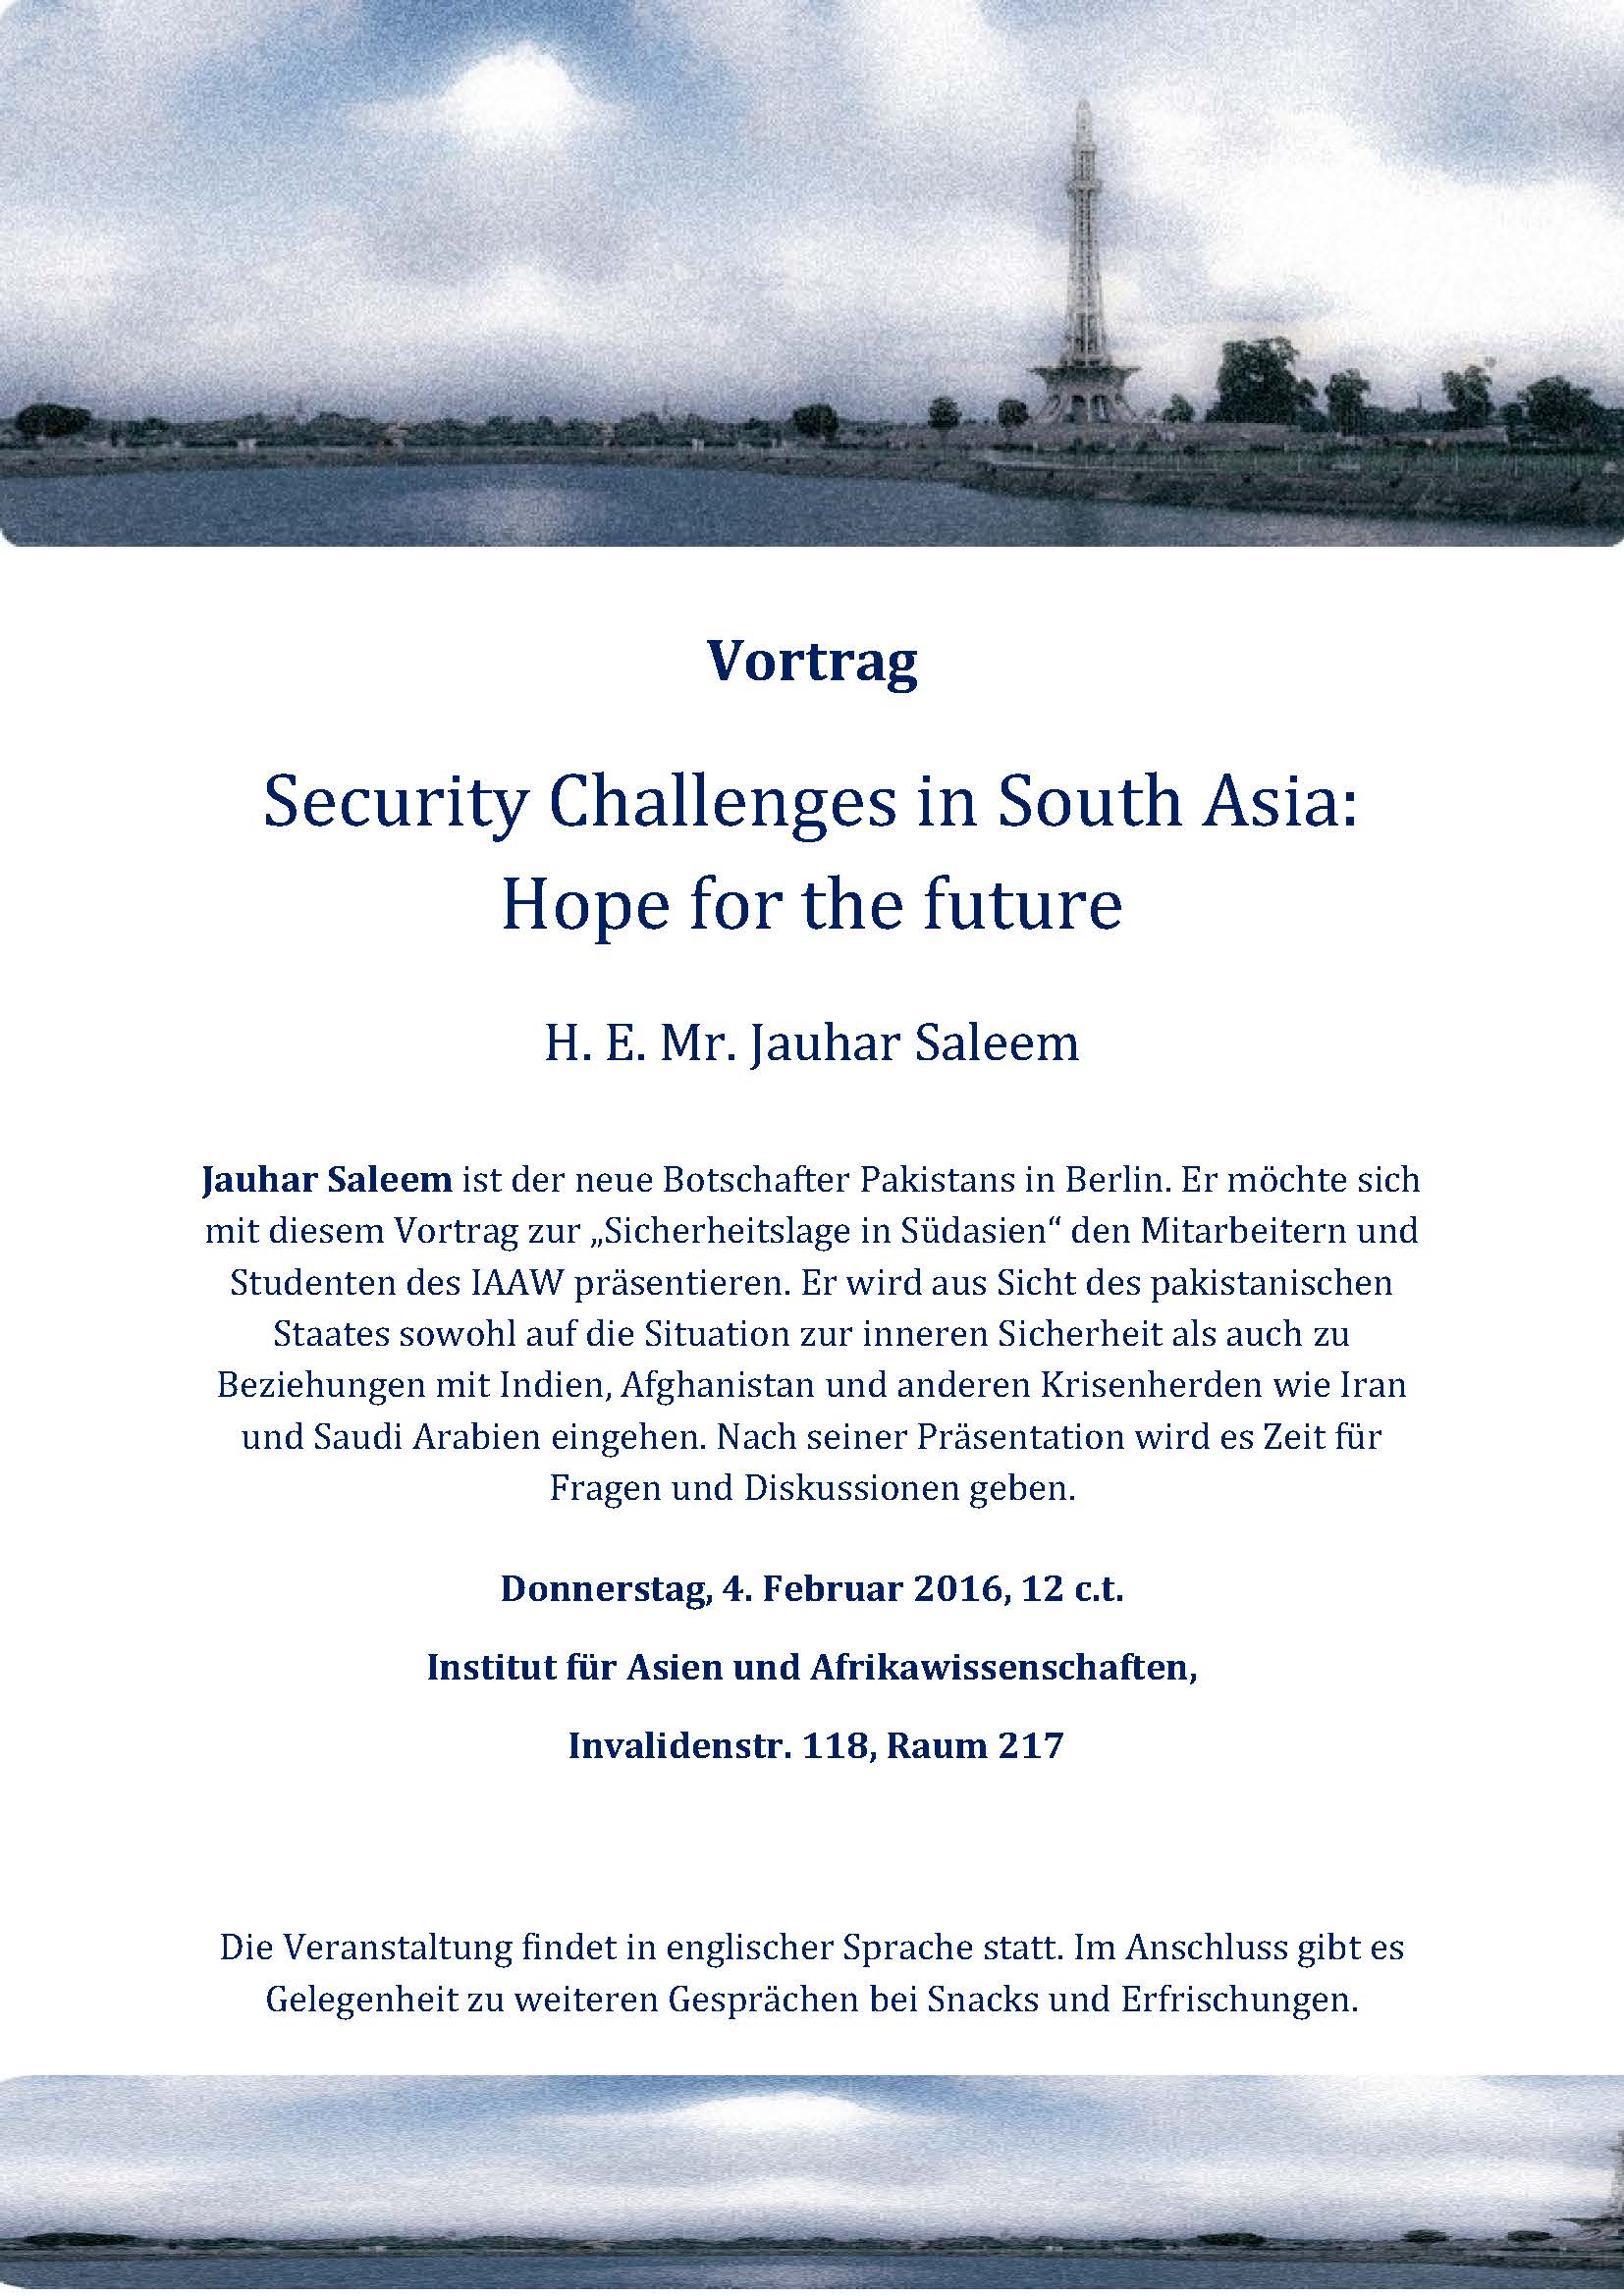 Talk-Security Challenges in South Asia- 4th jan 2016.jpg